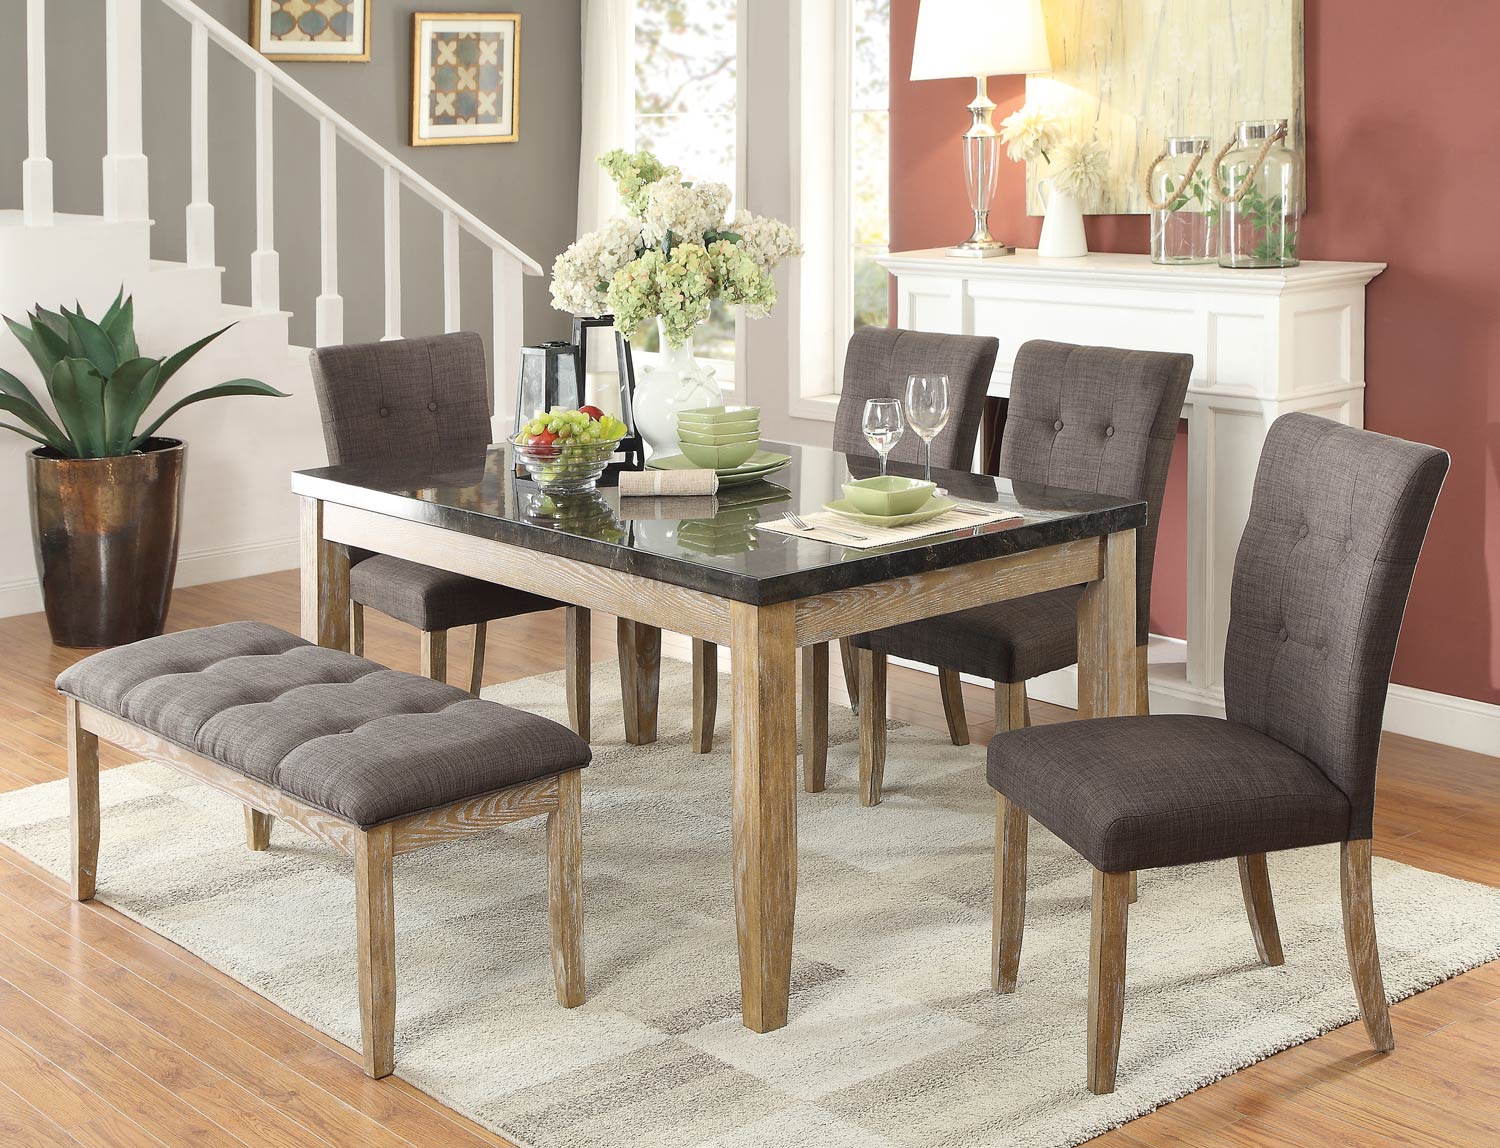 Homelegance Huron Dining Set - Faux Marble Top - Weathered Wood